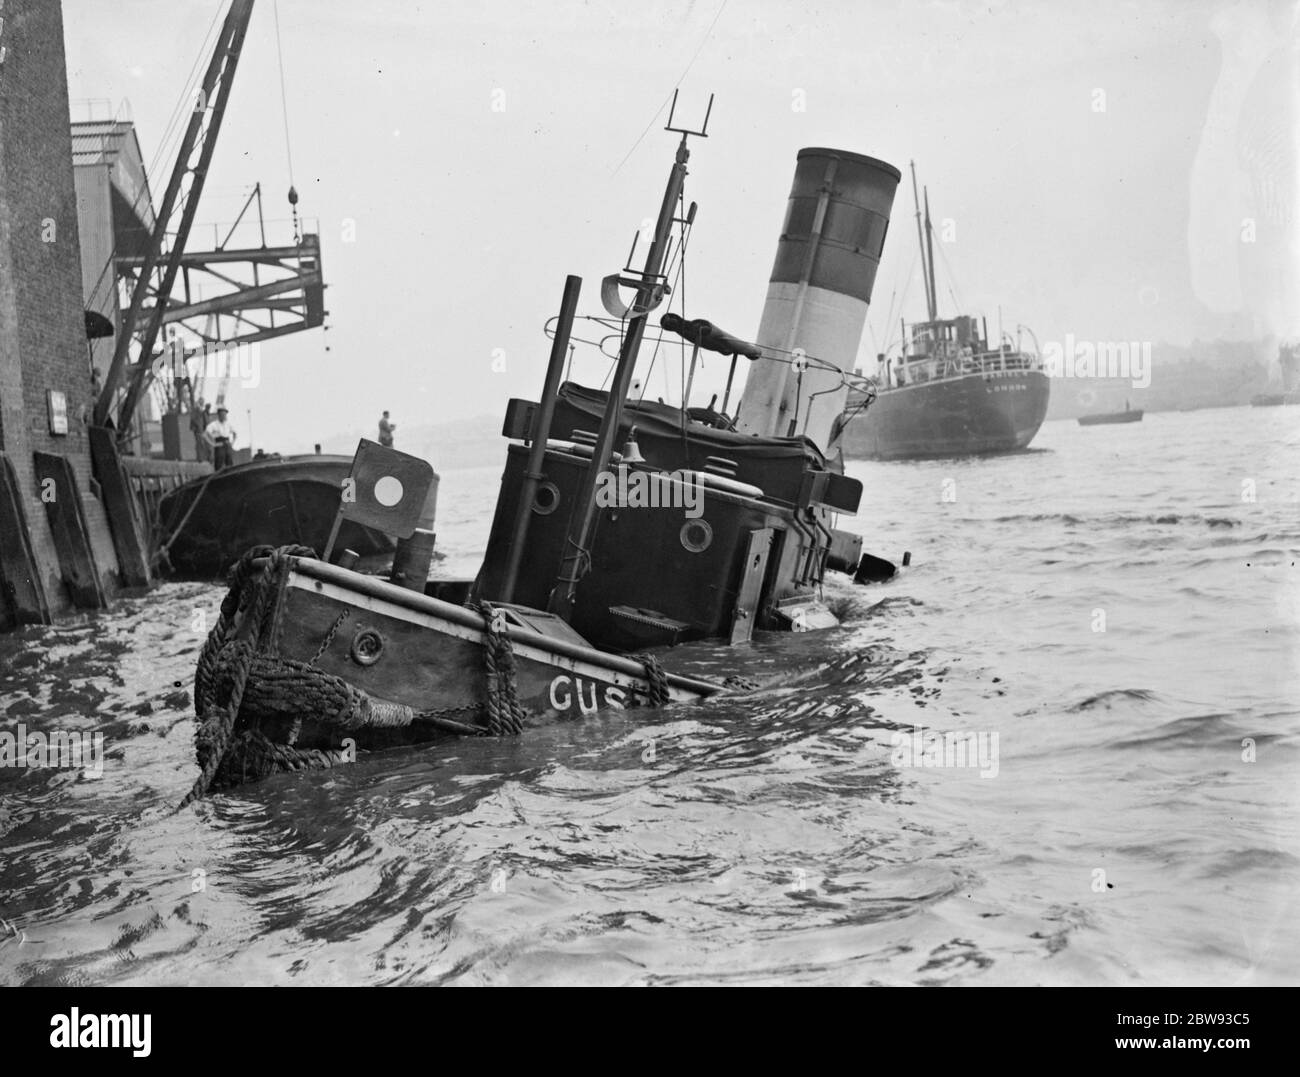 The prow of ' Gusty ' a tug sunk after a collision on the River Thames at Greenwich , London . 1939 Stock Photo